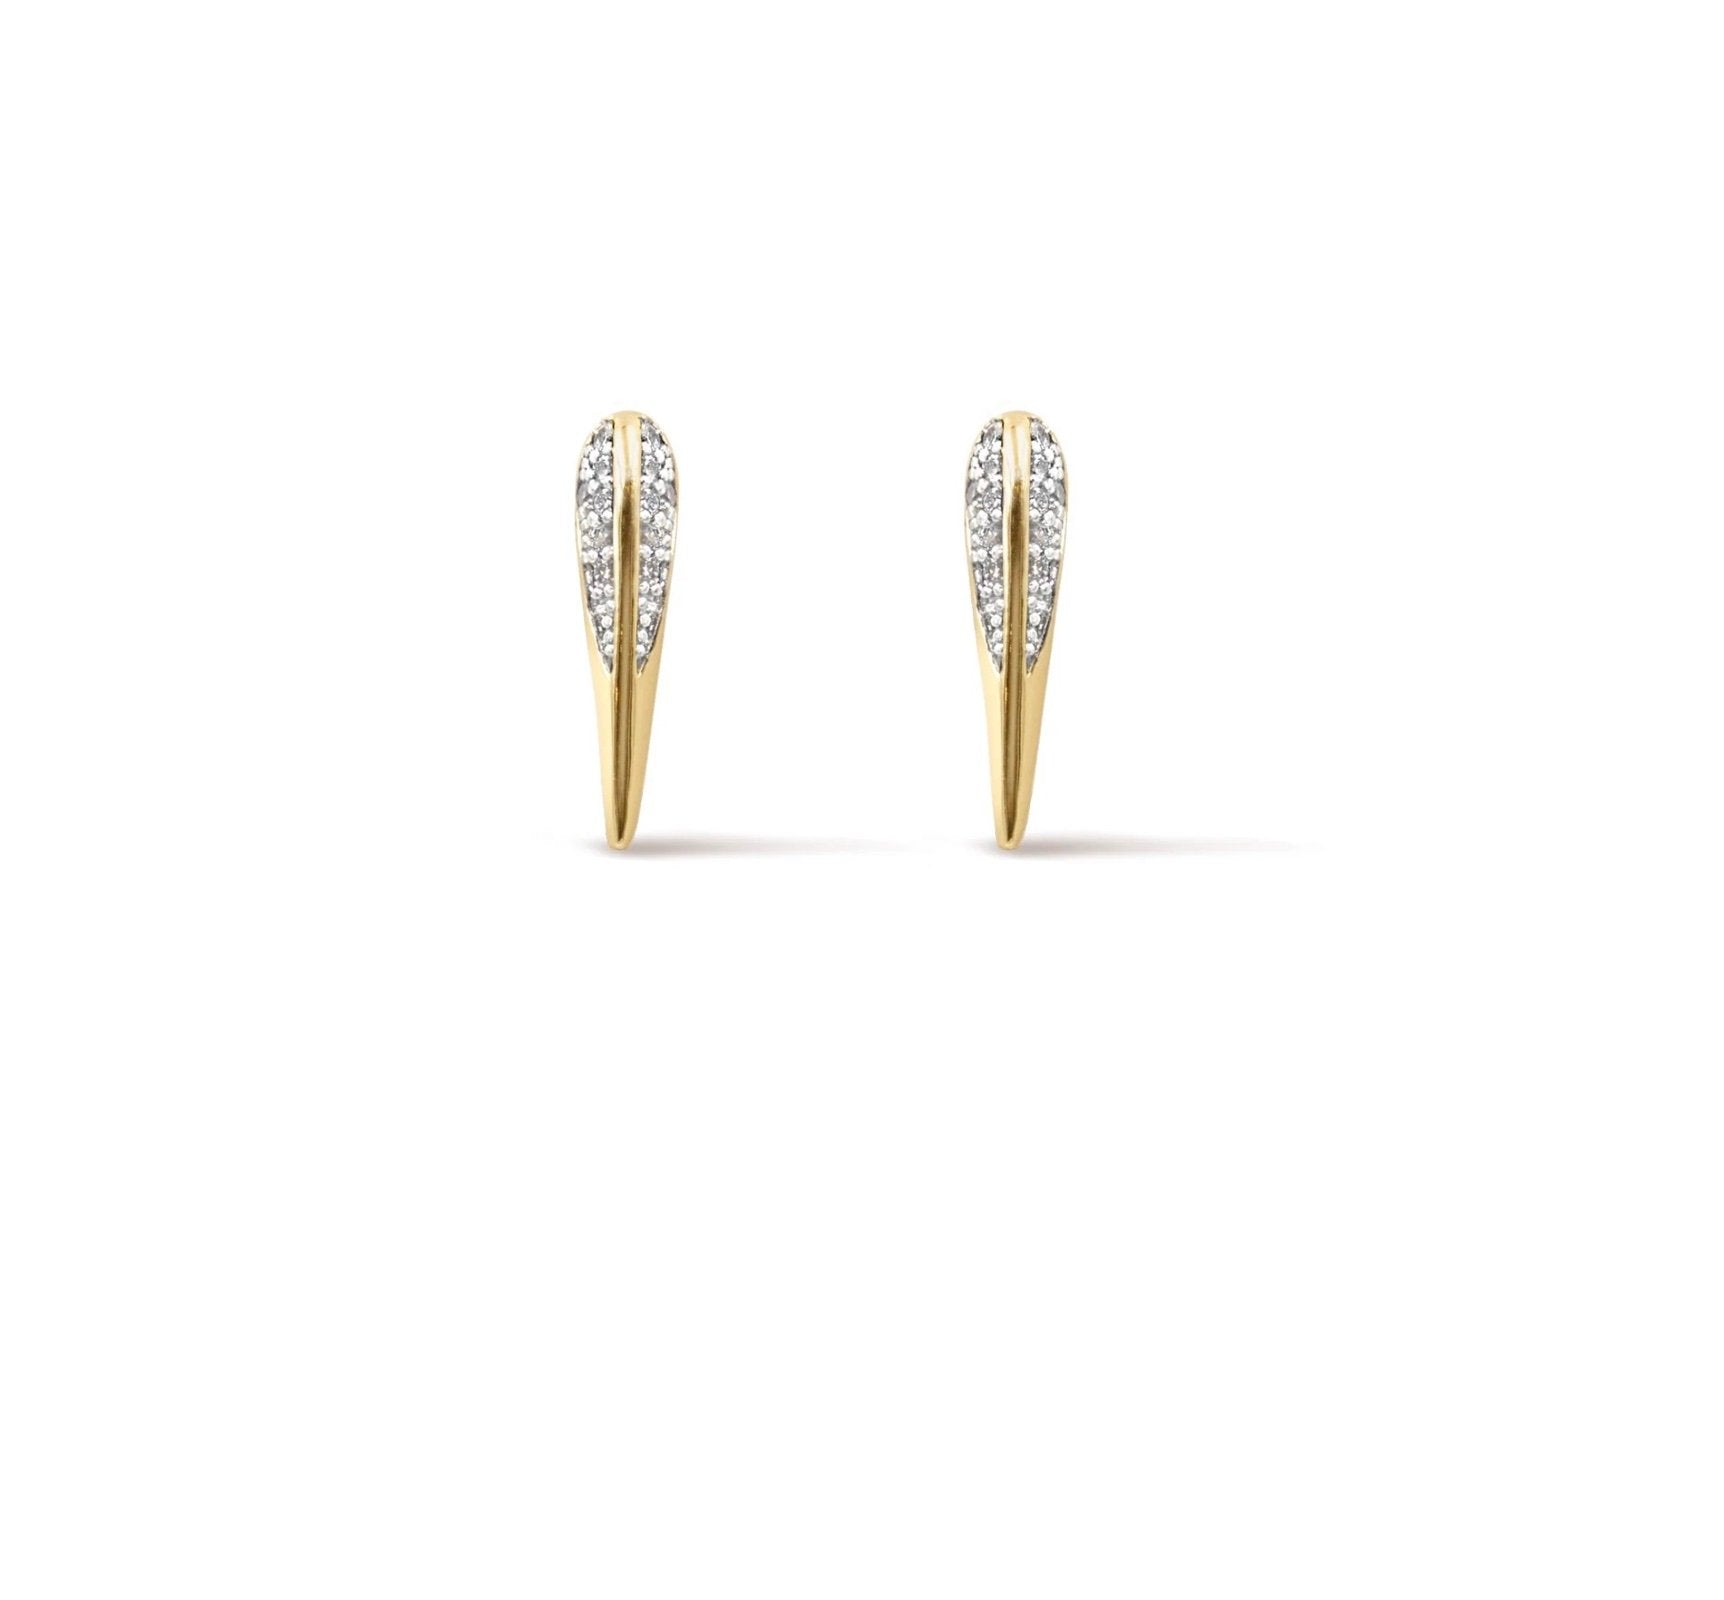 bird beak earrings with pave stones on white background - Camille Jewelry